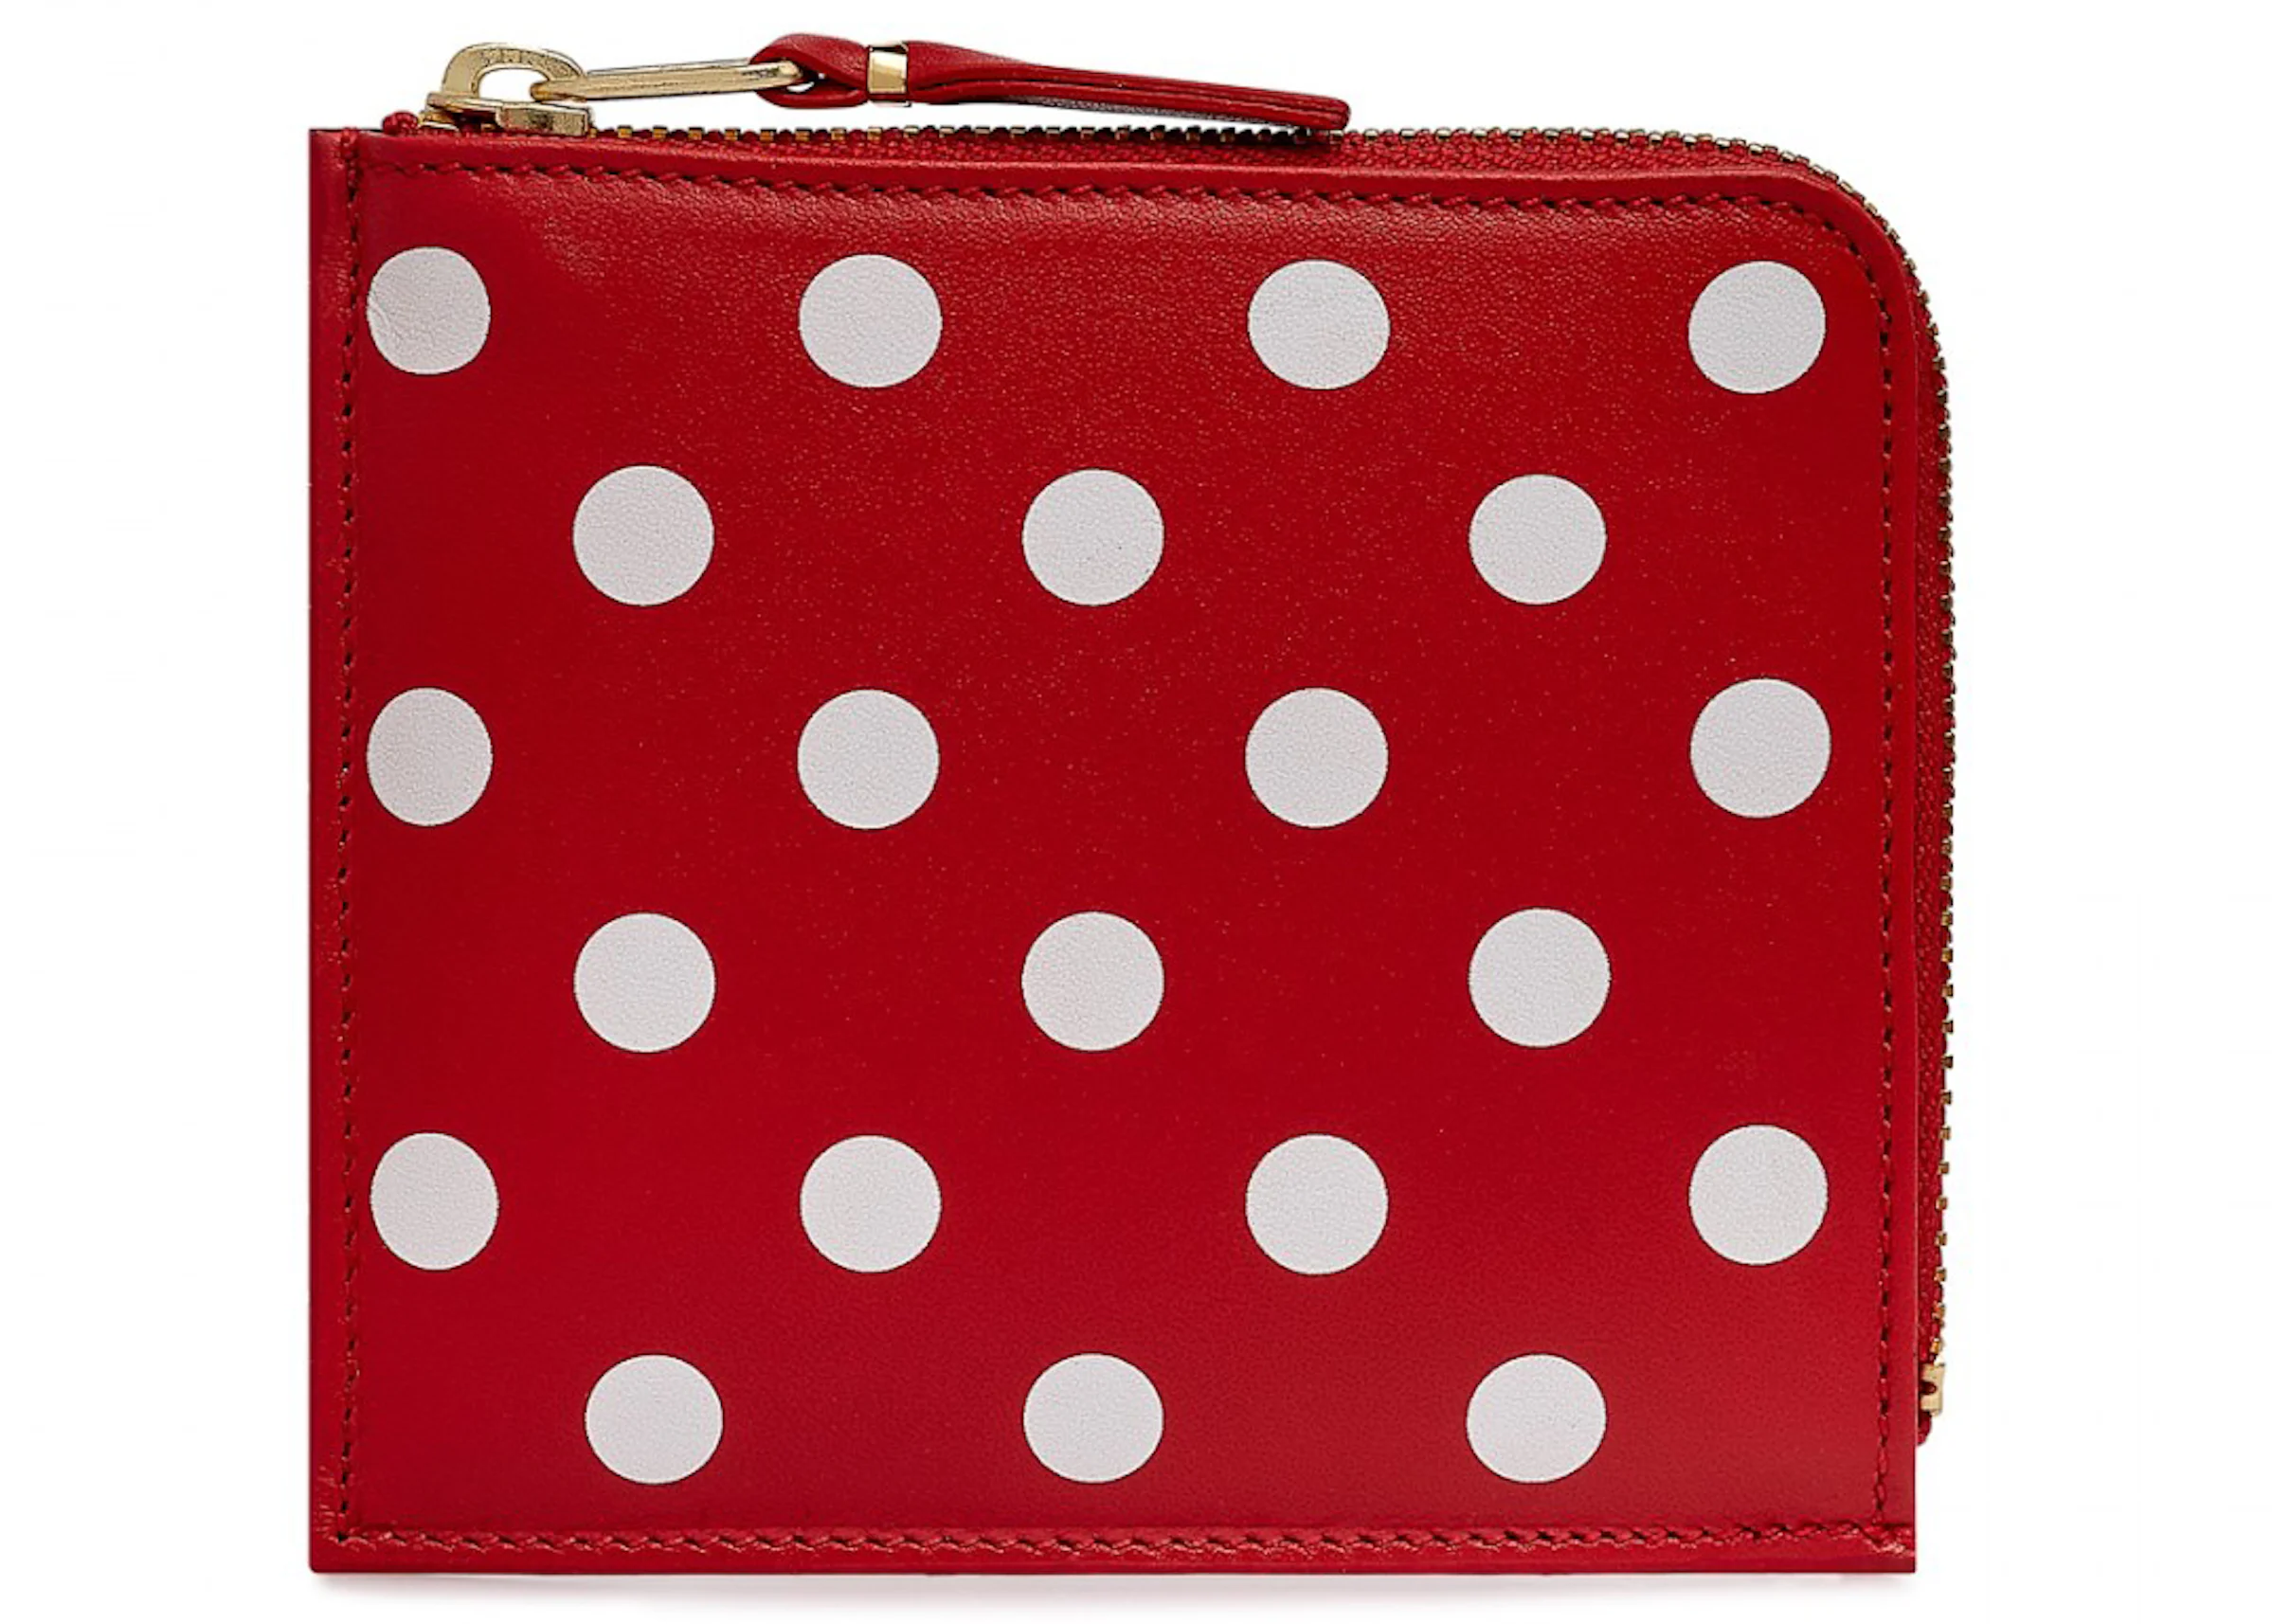 Comme des Garcons SA3100PD Wallet Polka Dots Red in Leather with Gold ...